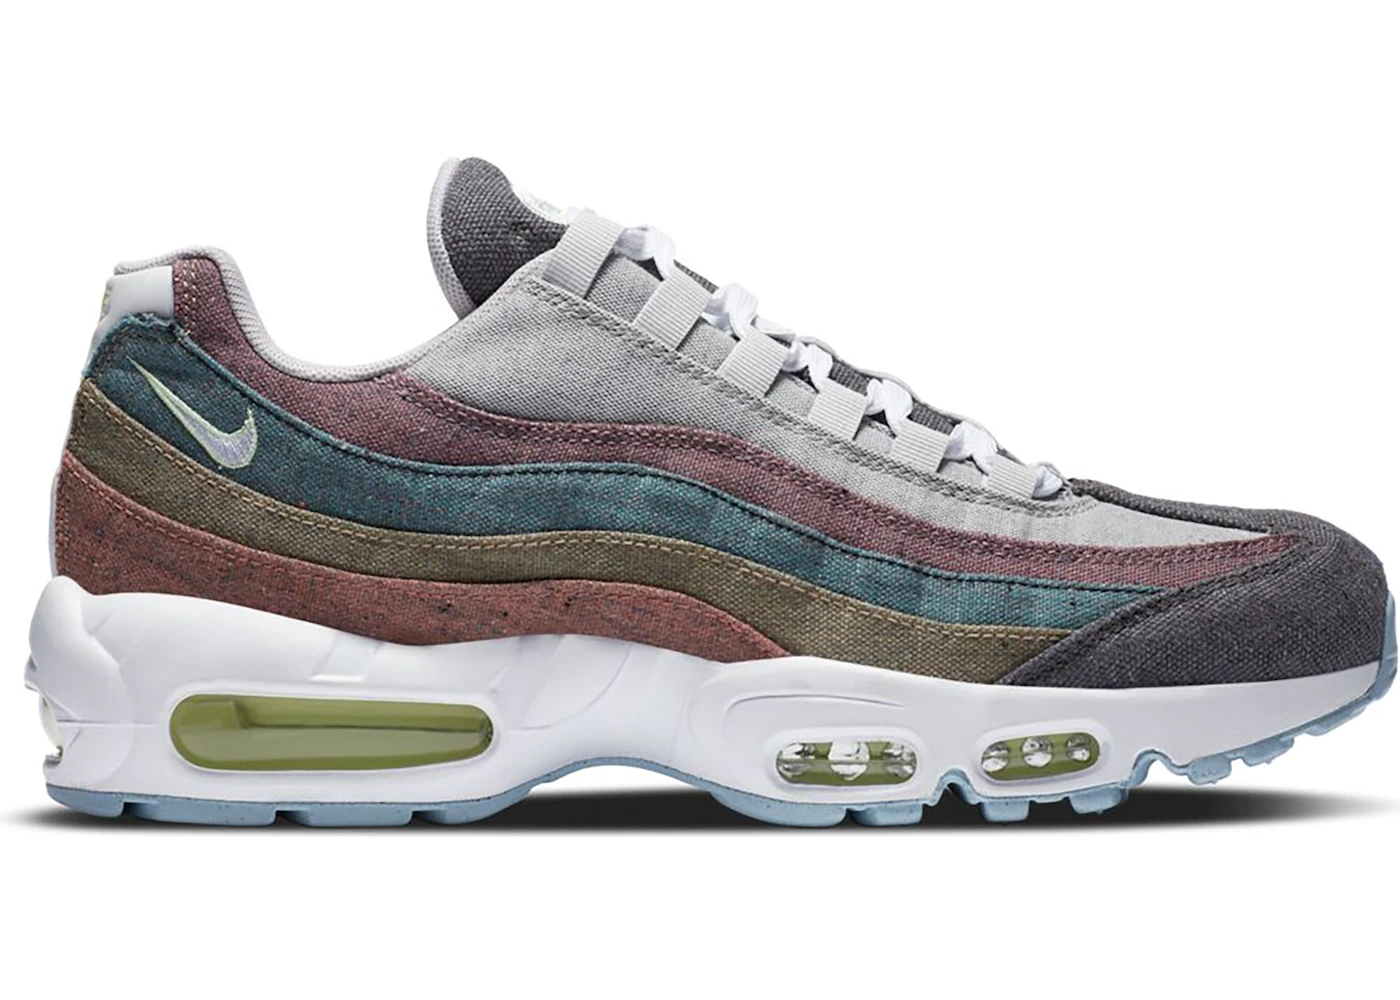 Nike Air Max 95 Recycled Canvas - CK6478-001 - US